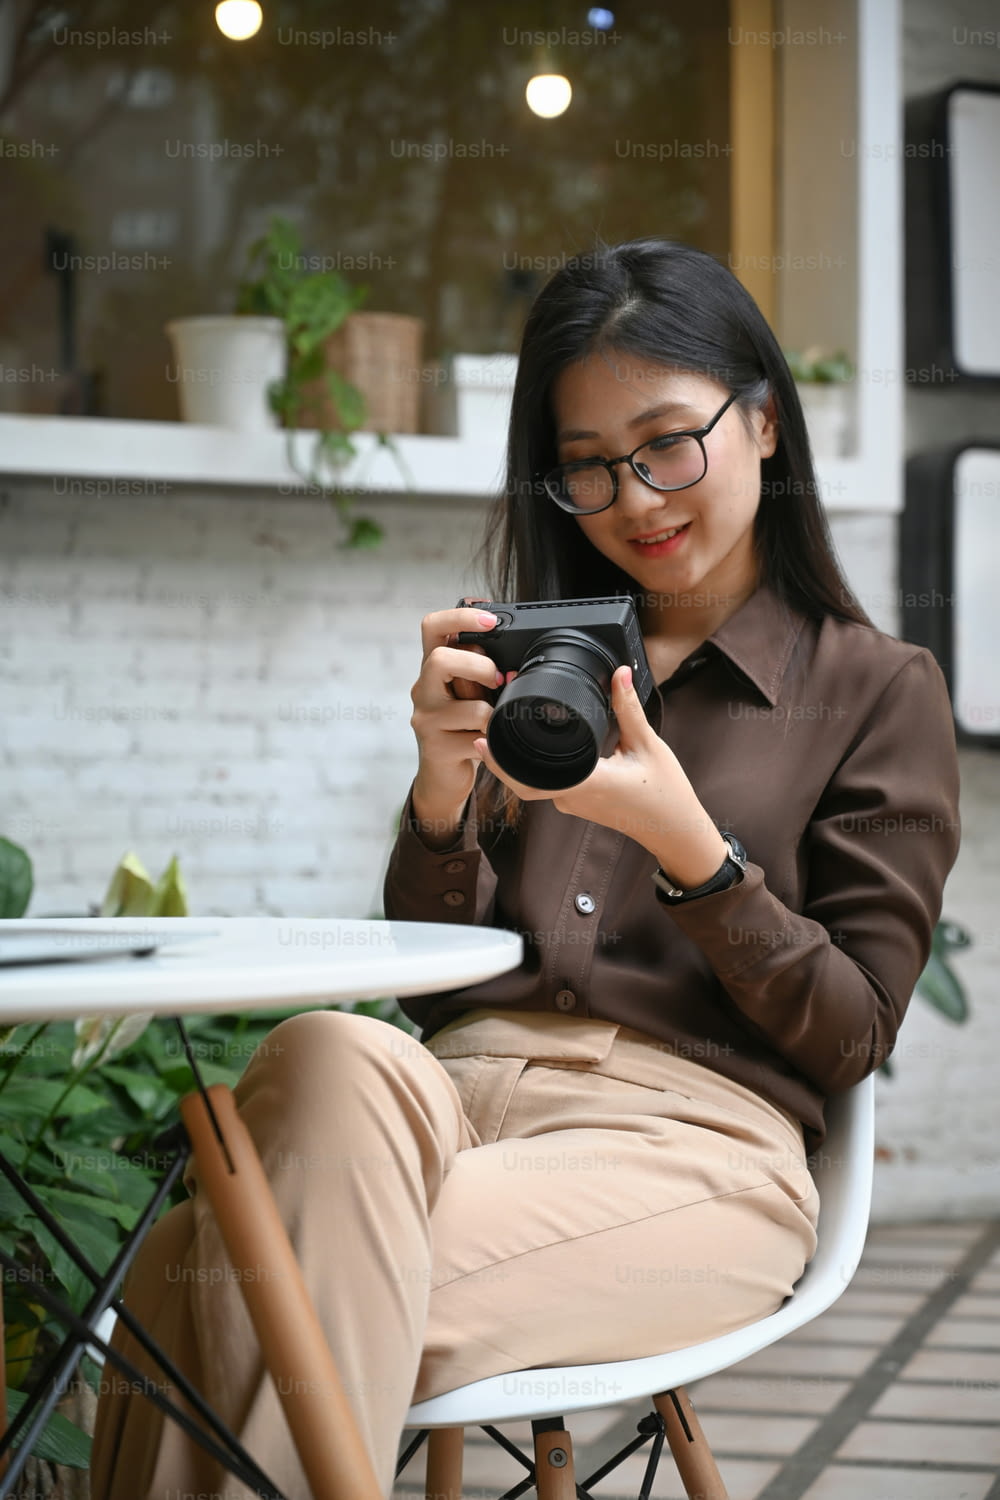 Portrait of smiling young woman sitting in outdoor cafe and checking image on her digial camera.